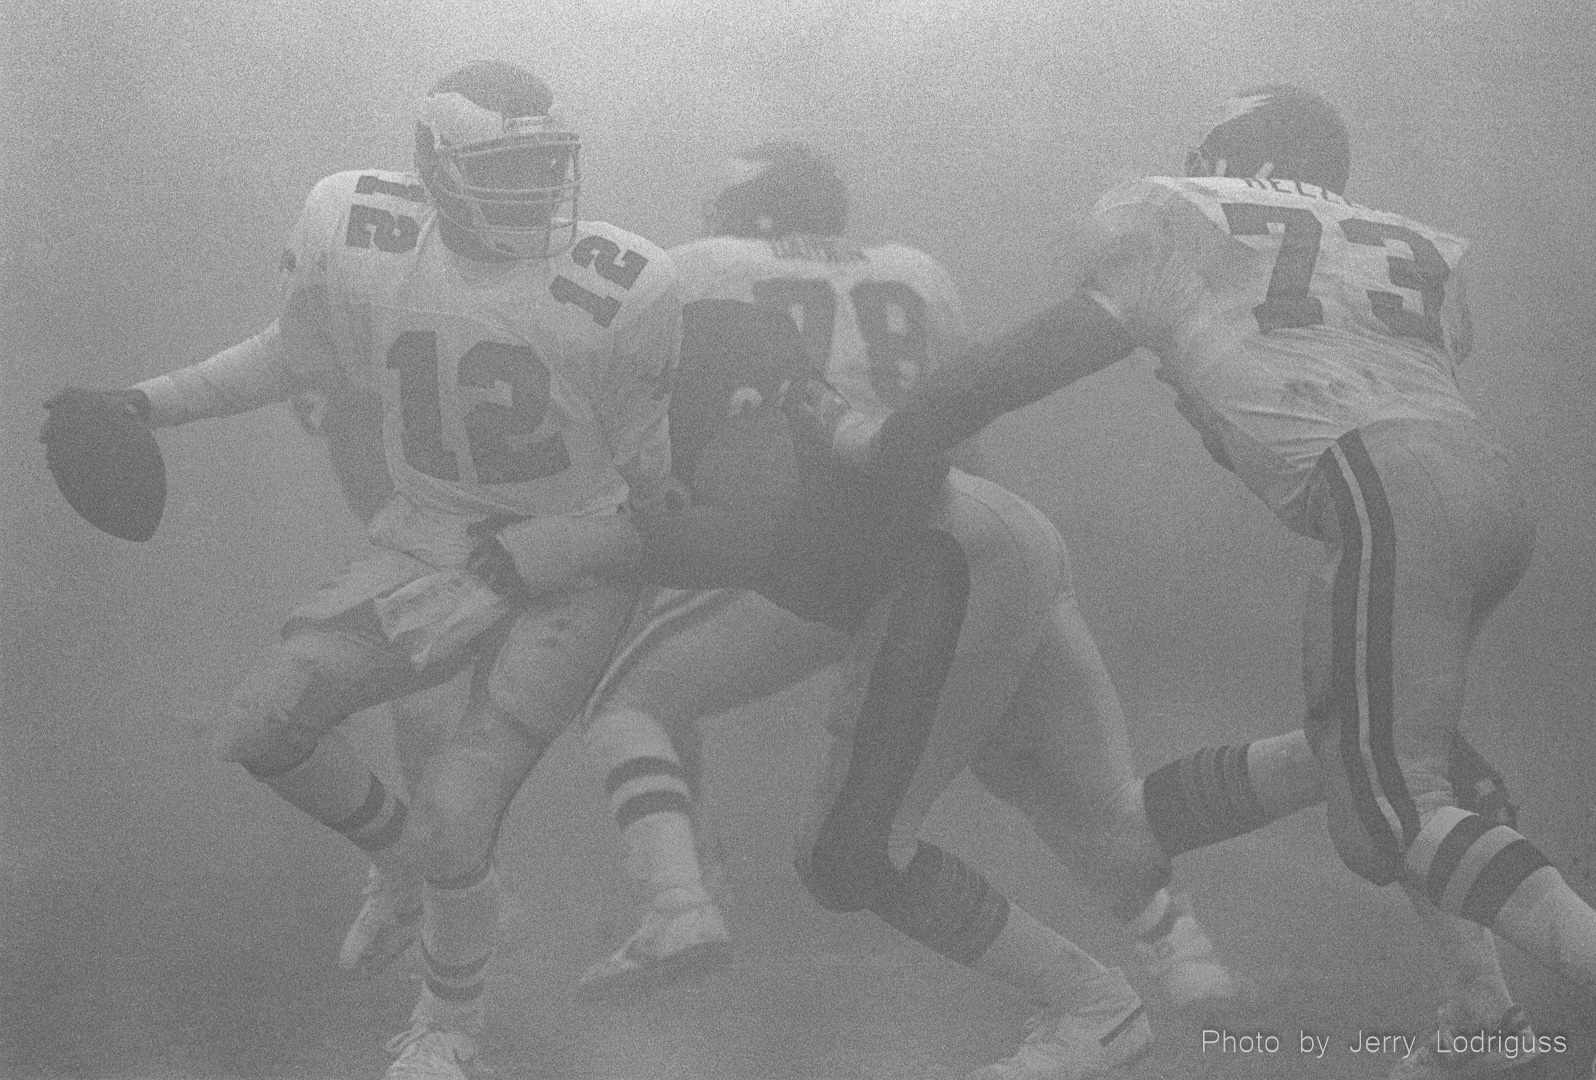 Eagles Quarterback Randall Cunningham scrambles in the fog during the "Fog Bowl" on  December 31, 1988 in a National Football League playoff game between the Philadelphia Eagles and the Chicago Bears. A heavy, dense fog rolled over Chicago's Soldier Field during the 2nd quarter, cutting visibility to about 15-20 yards for the rest of the game. Philadelphia moved the ball effectively all day and Eagles quarterback Randall Cunningham had 407 passing yards, but they could not get the ball into the end zone. The Bears won 20-12.